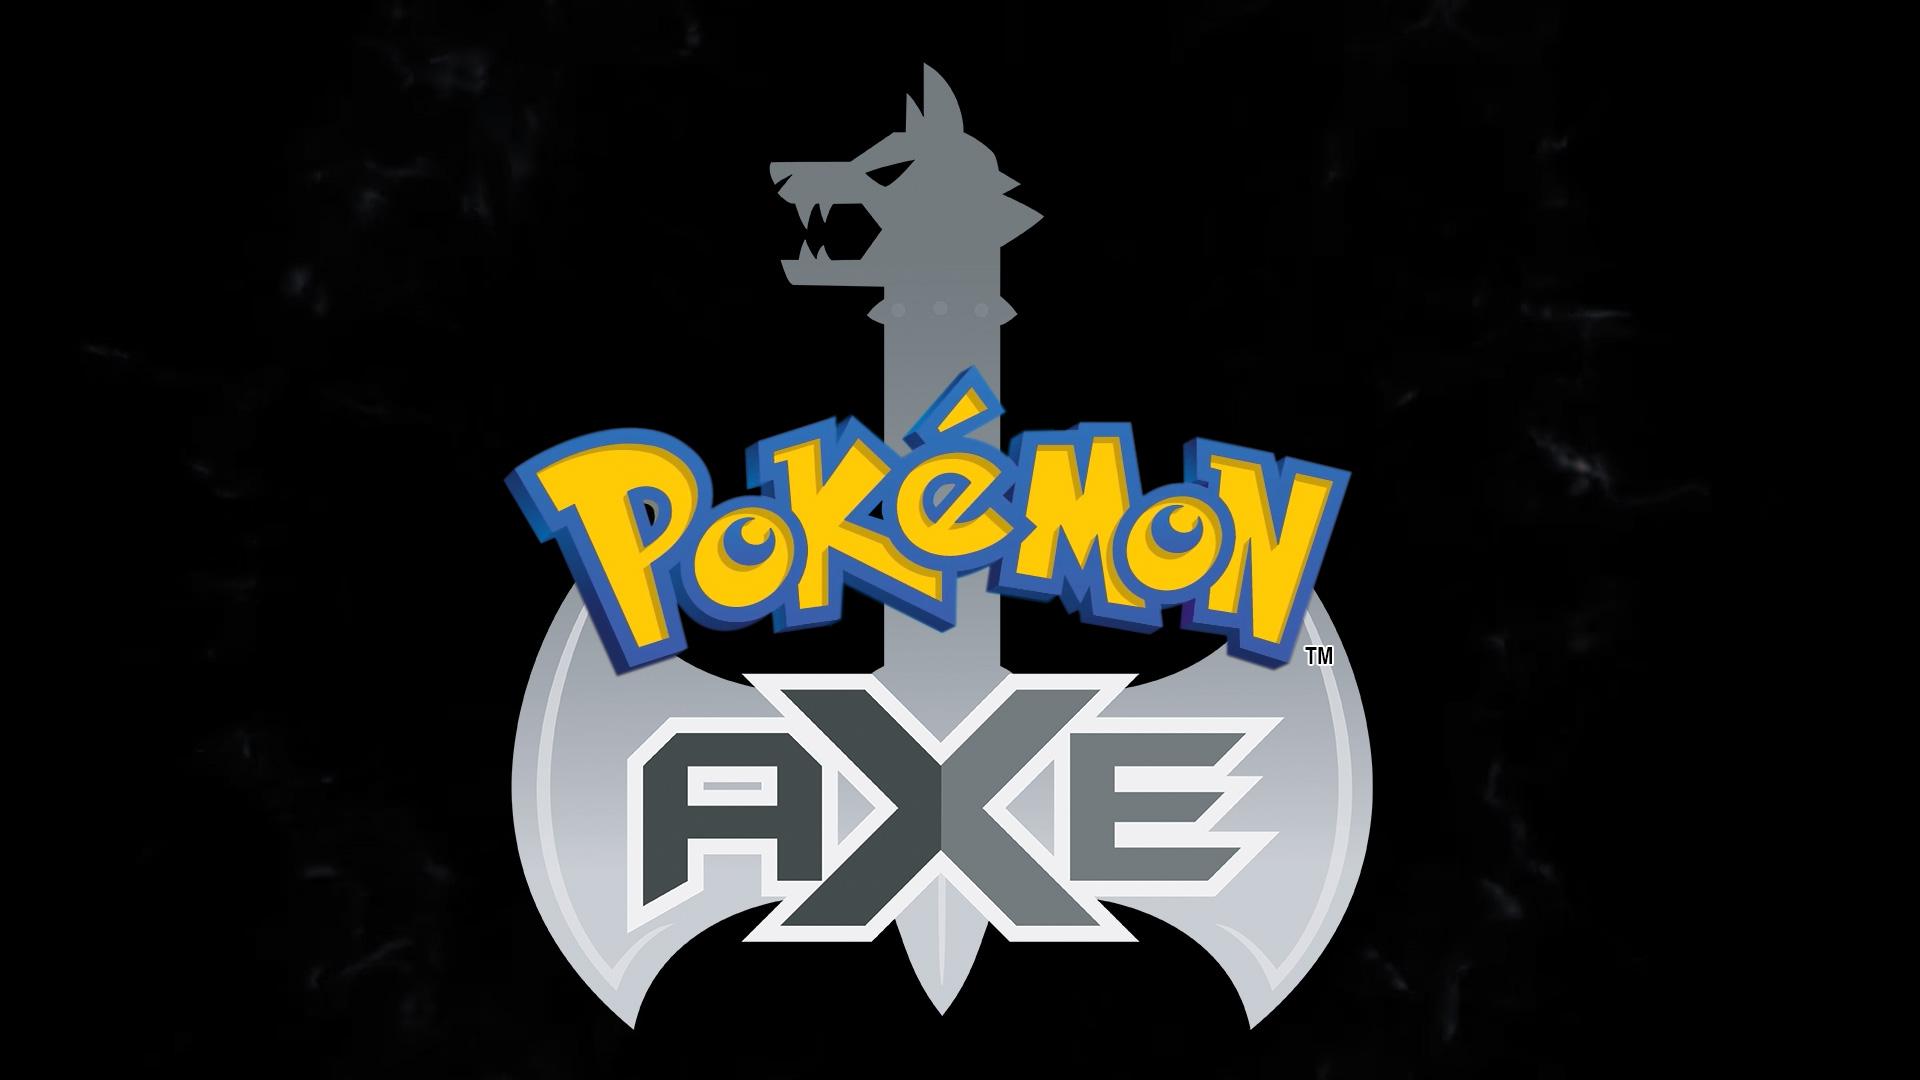 You have my Pokémon Sword. And you have my Pokémon Shield. And my